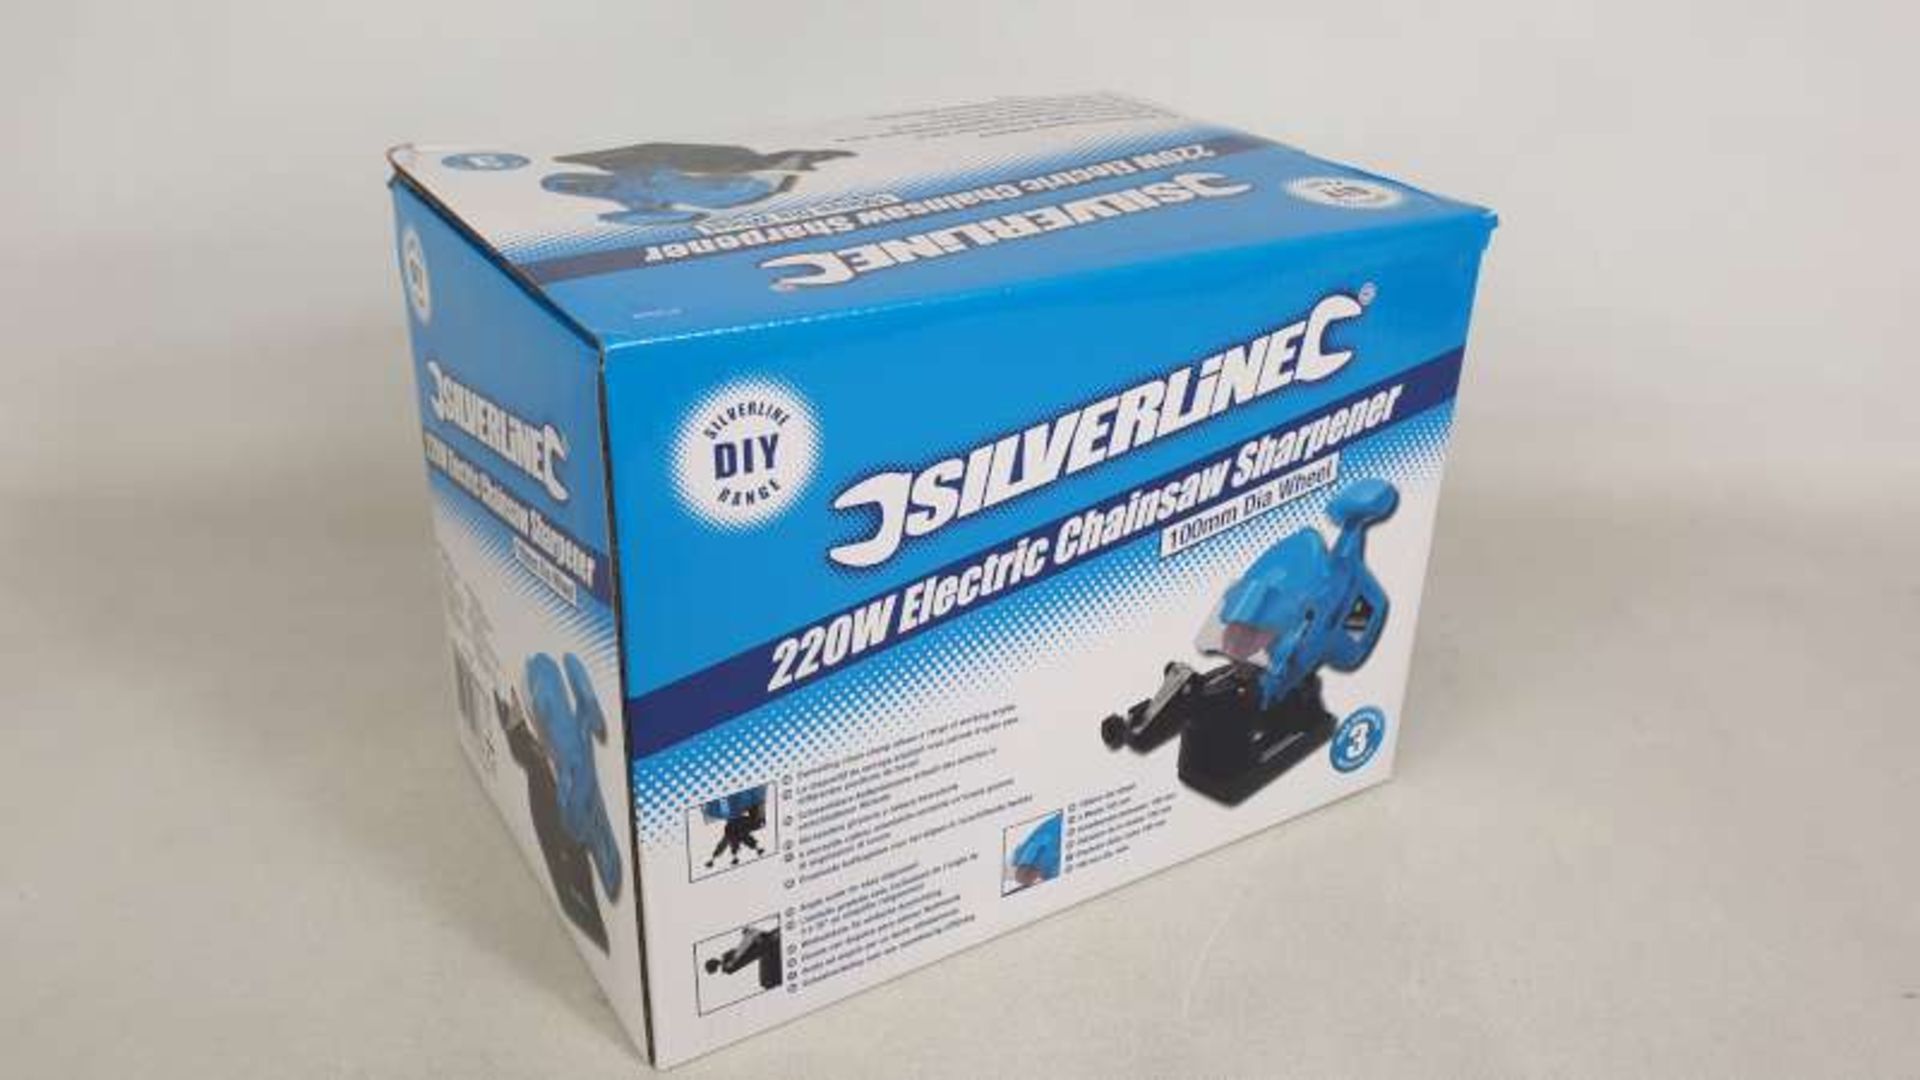 6 X BRAND NEW BOXED SILVERLINE 220W ELECTRIC CHAINSAW SHARPENERS WITH 100MM DIAL WHEEL AND 3 YEARS